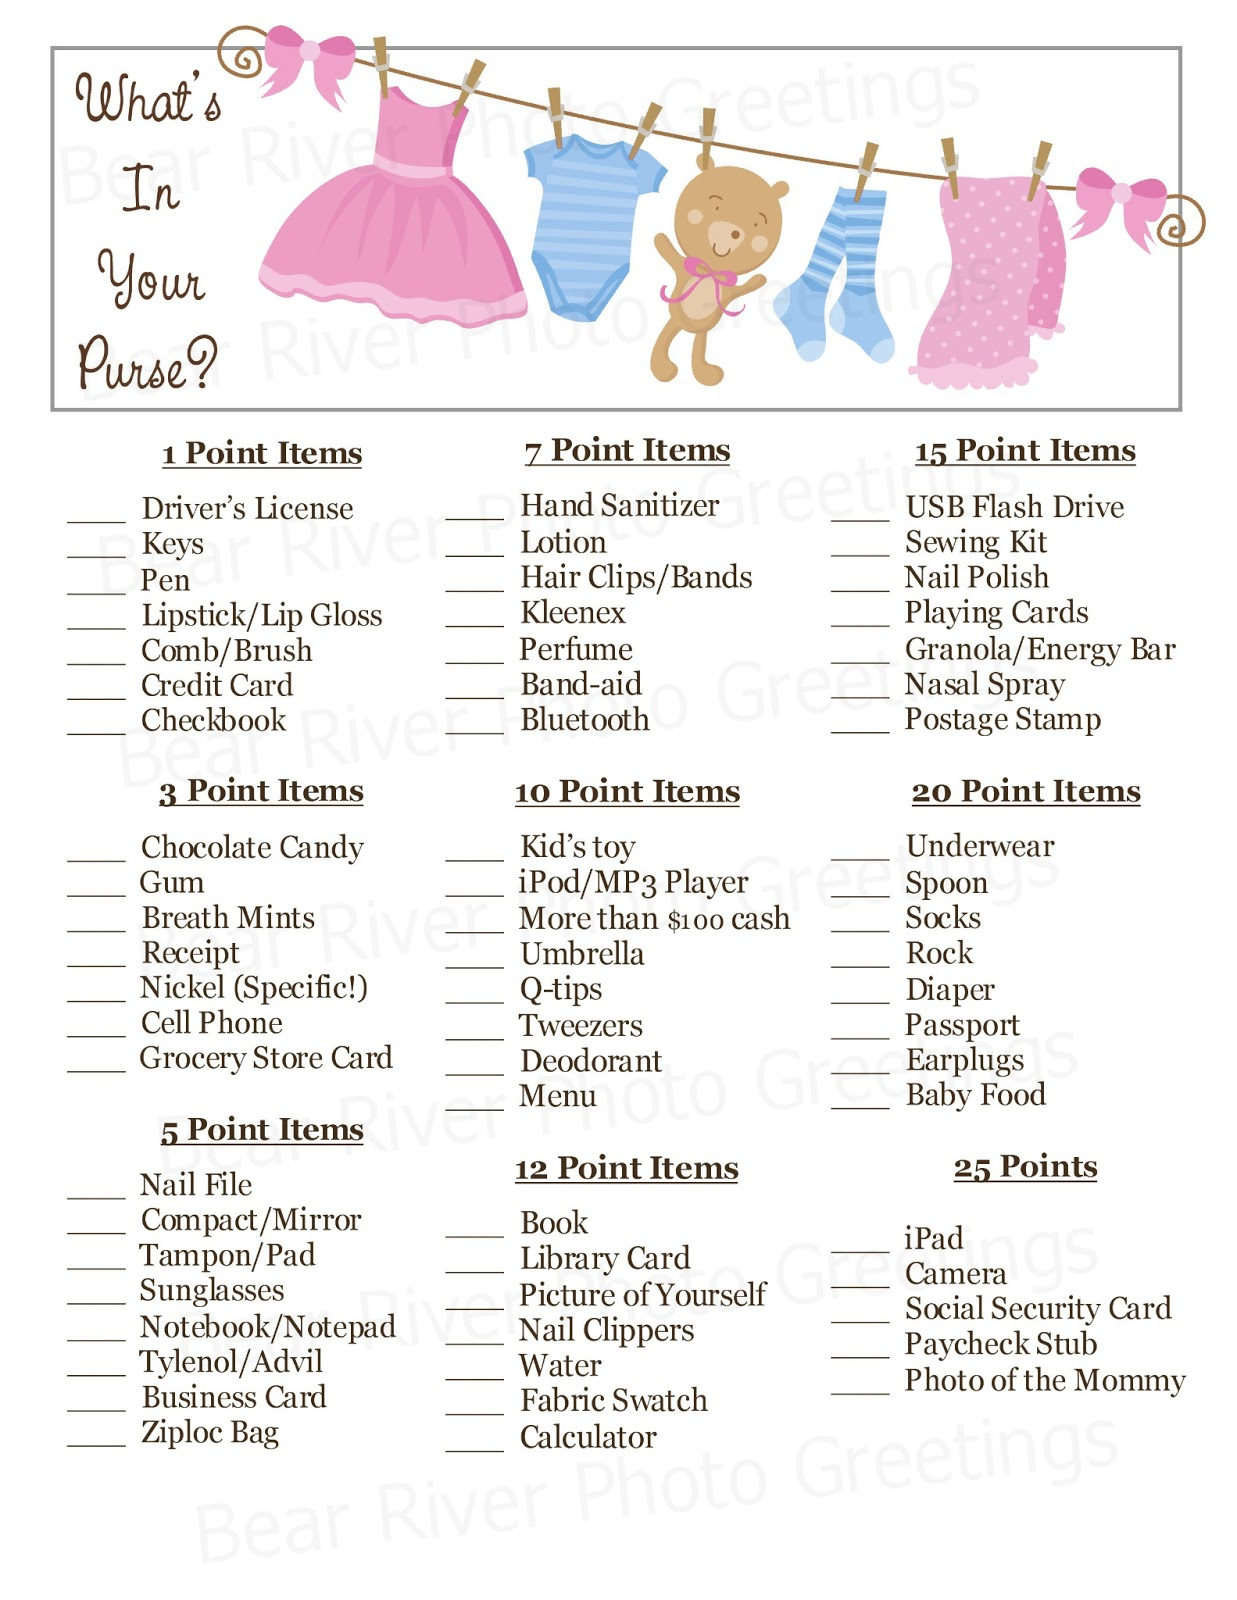 Bear River Photo Greetings: 2013 - Free Printable What&amp;amp;#039;s In Your Purse Game